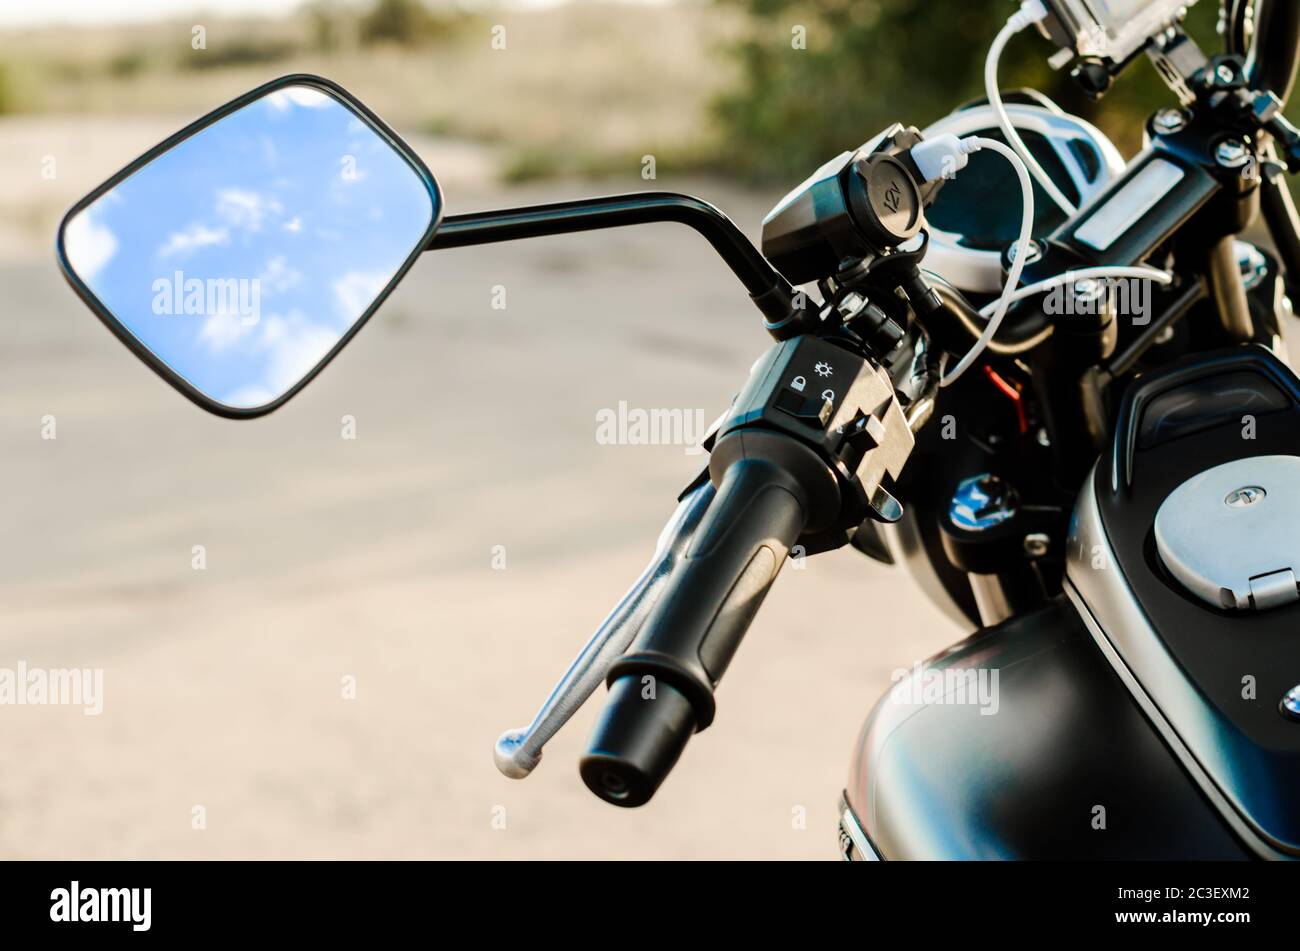 reflection of the nab and clouds in the motorcycle mirror, motorcycle steering wheel and motorcycle fuel tank Stock Photo